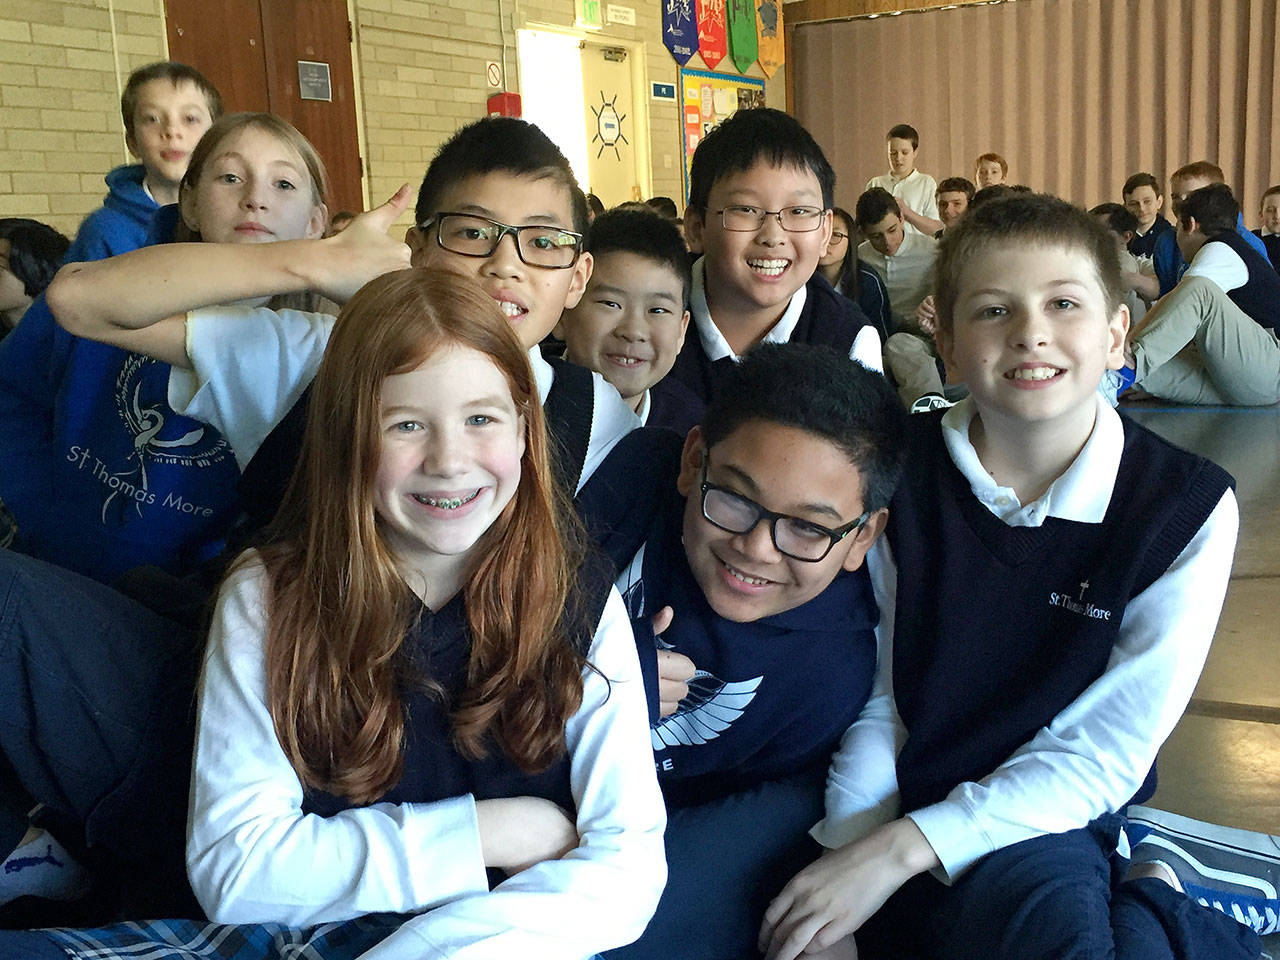 St. Thomas More Parish School in Lynnwood celebrated Catholic Schools Week, Jan. 28-Feb. 2. Pictured are students (front row, from left) Emerson Verge, Caden Rigor, Tiernan Bowen, (second row) Aaron Vu, (third row) Guadalupe Moon, Jesse Lu, Owen Lin and (in back) Noah Barron. (Contributed photo)